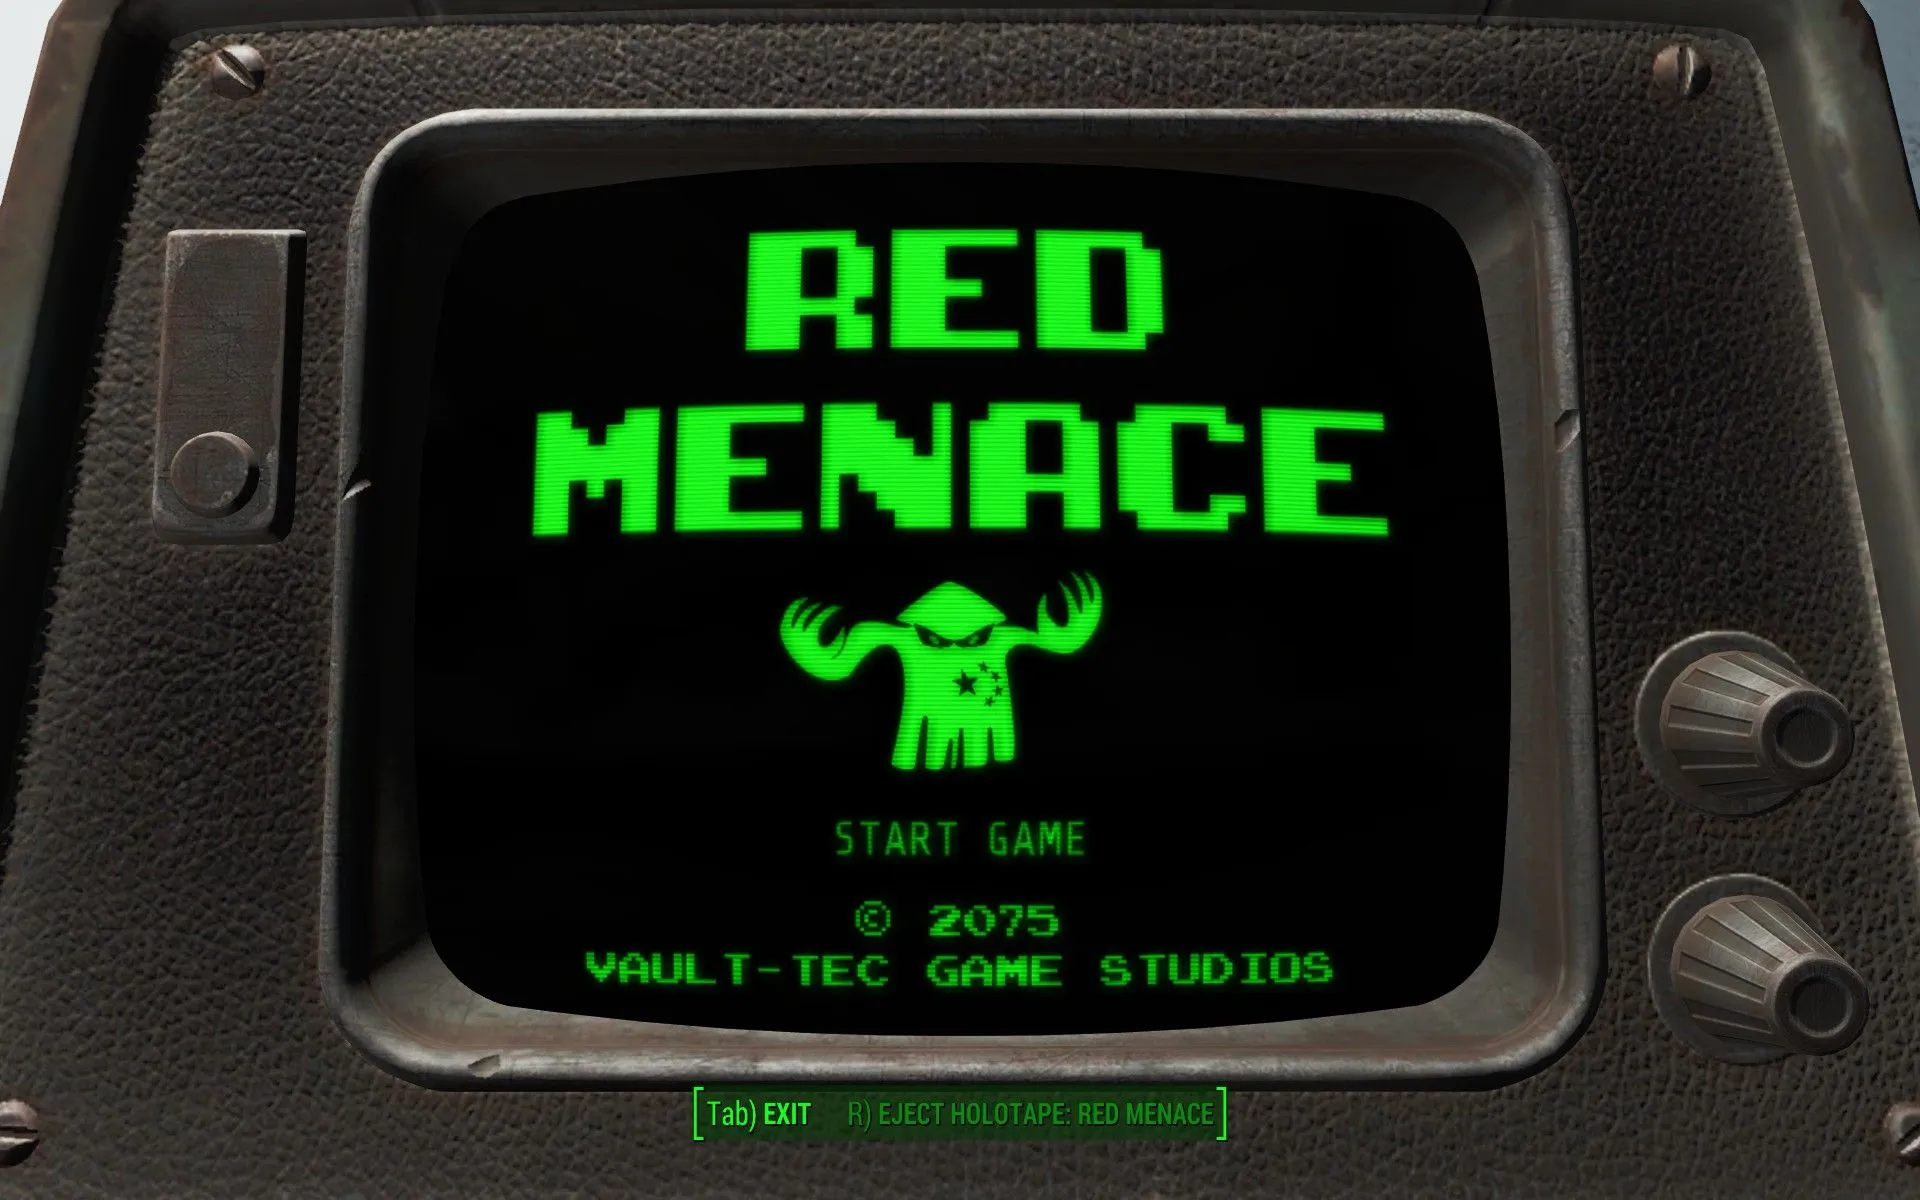 Menace игра. Red Menace Fallout 4. Фоллаут убежище 111. Fallout 4: all Pip-boy Holotape games. Pip boy Mini-games.